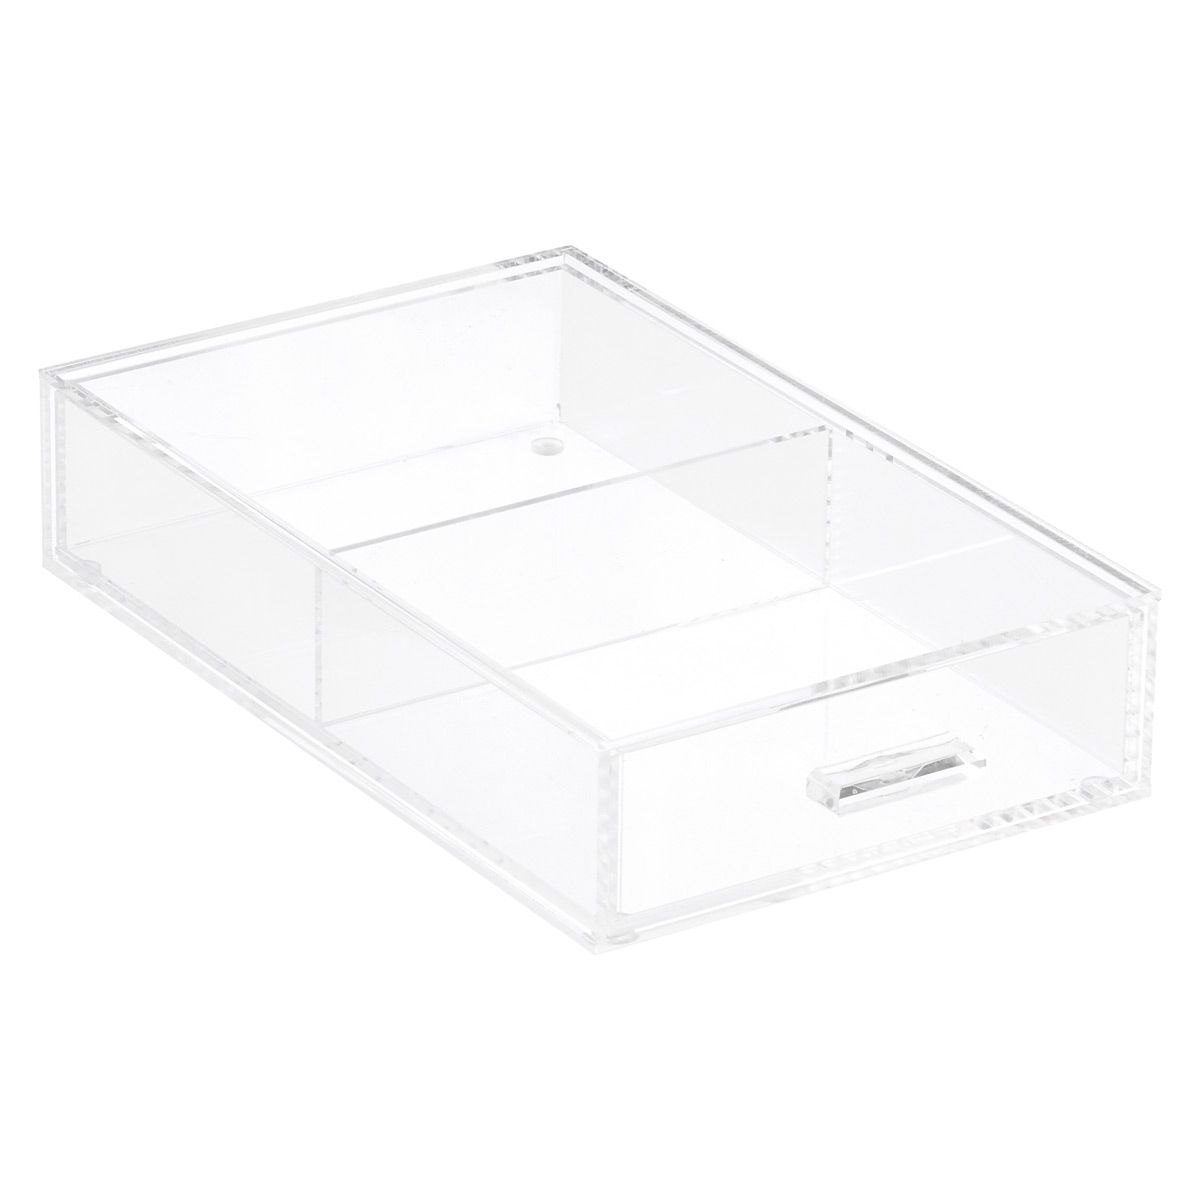 Acrylic Accessory Drawer | The Container Store